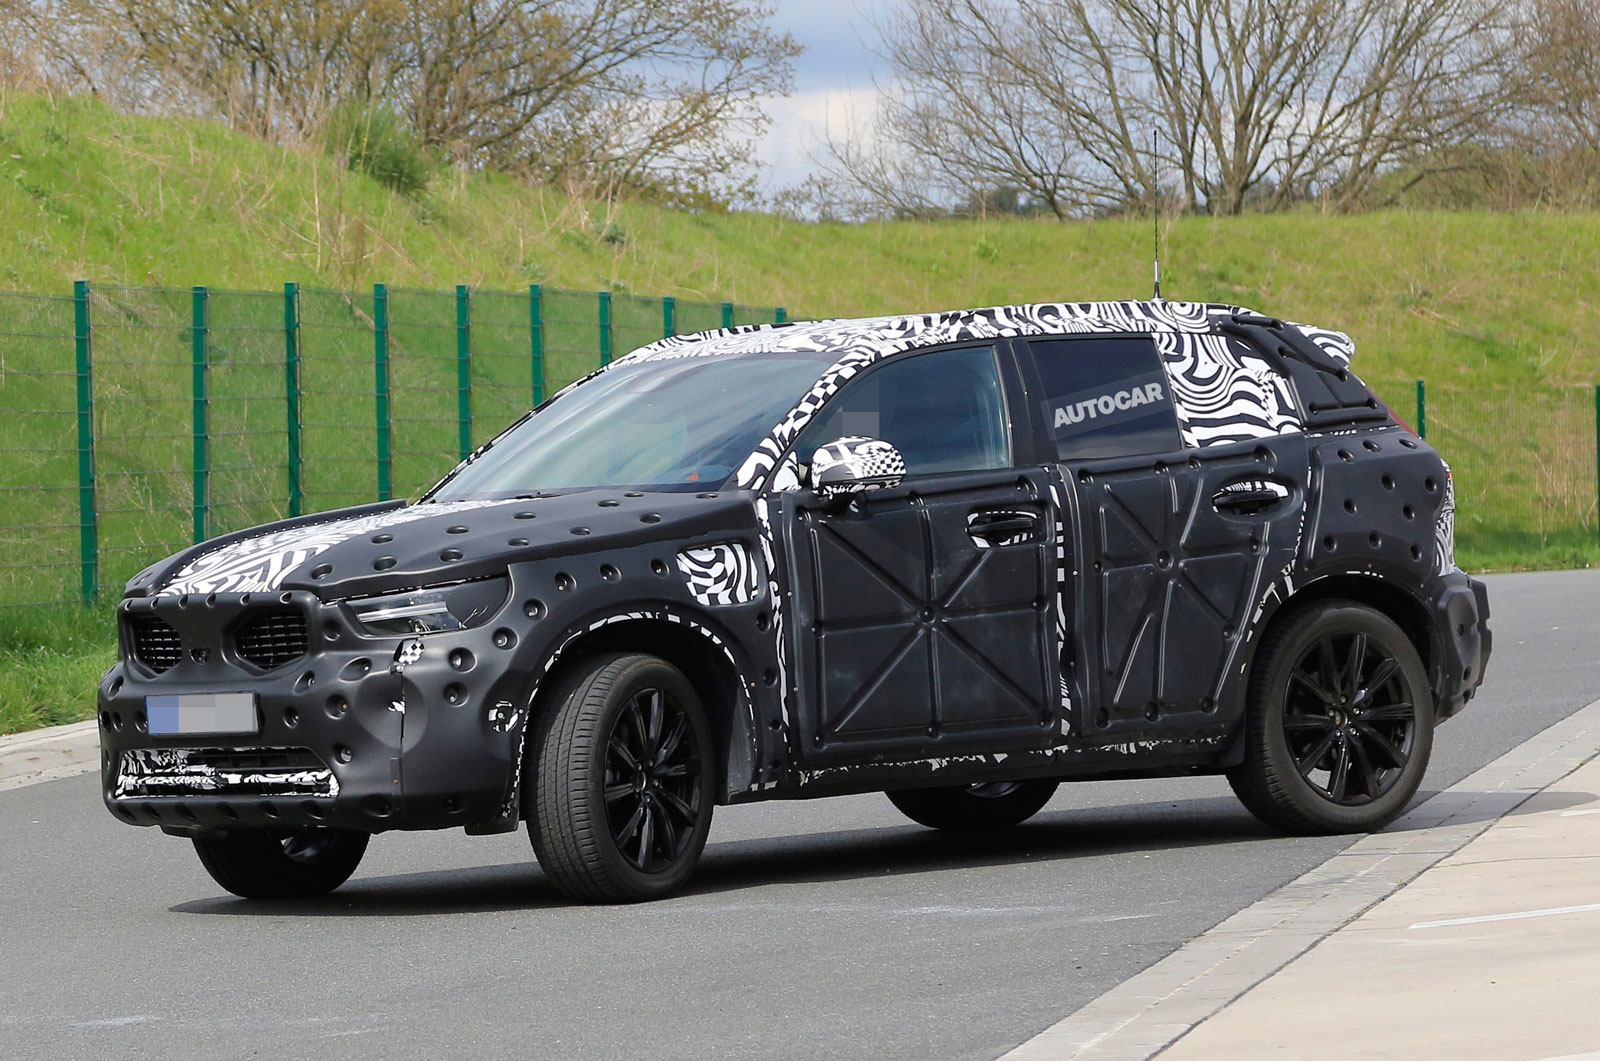 Volvo XC40 - future BMW X1 rival spotted testing on UK roads | Autocar